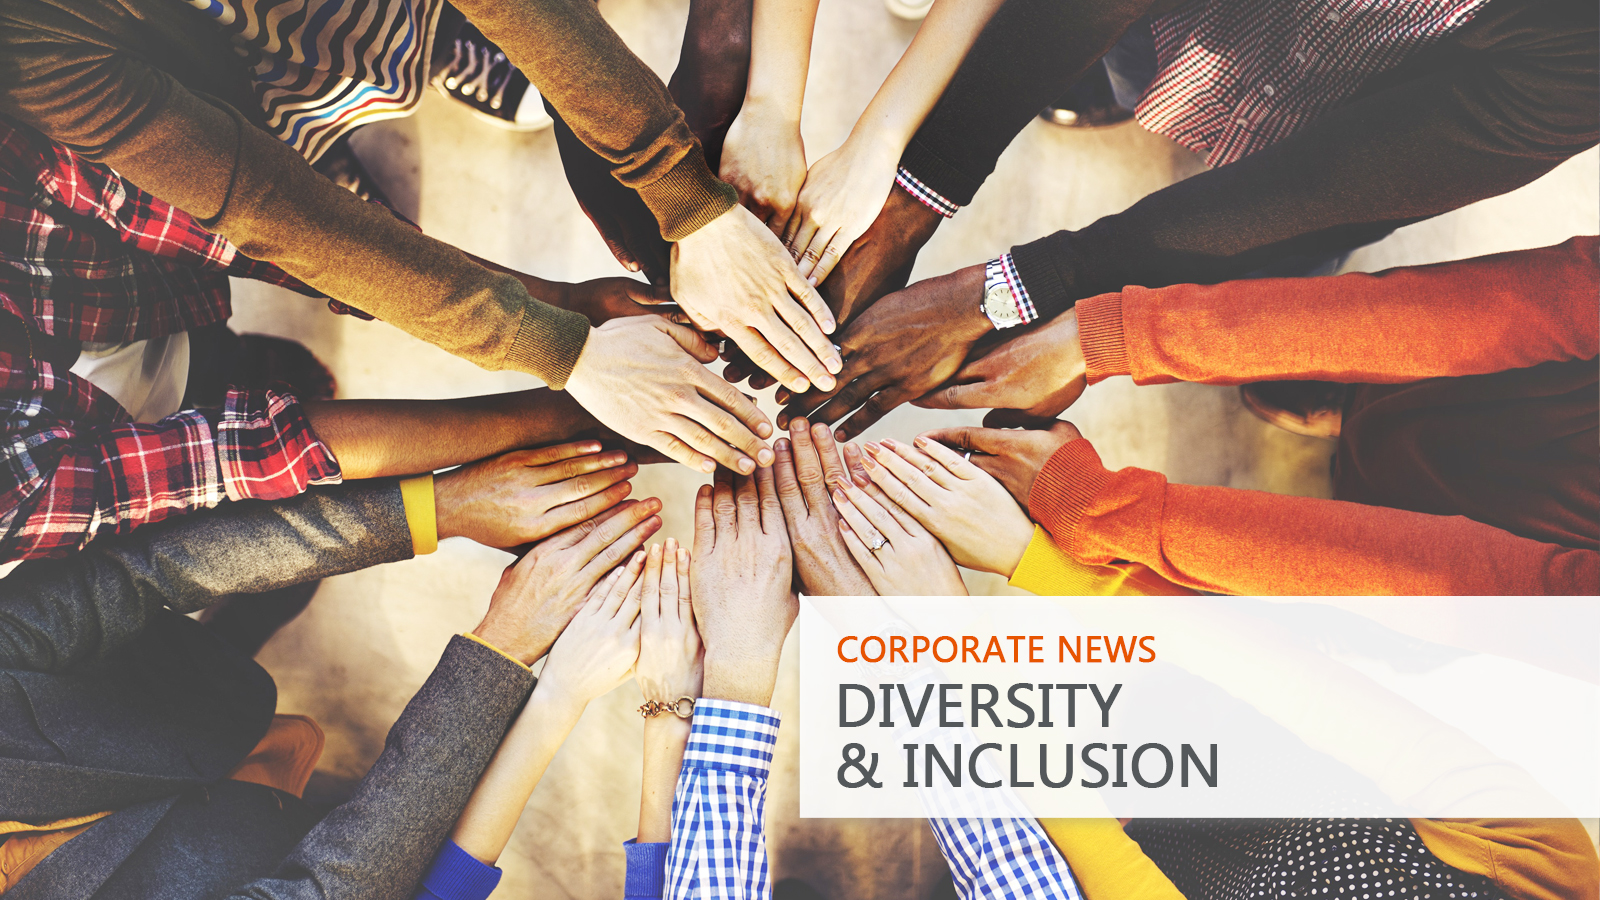 LIXIL reaffirms its commitment to Diversity and Inclusion with broader initiatives to drive “Inclusive for All” サムネイル画像